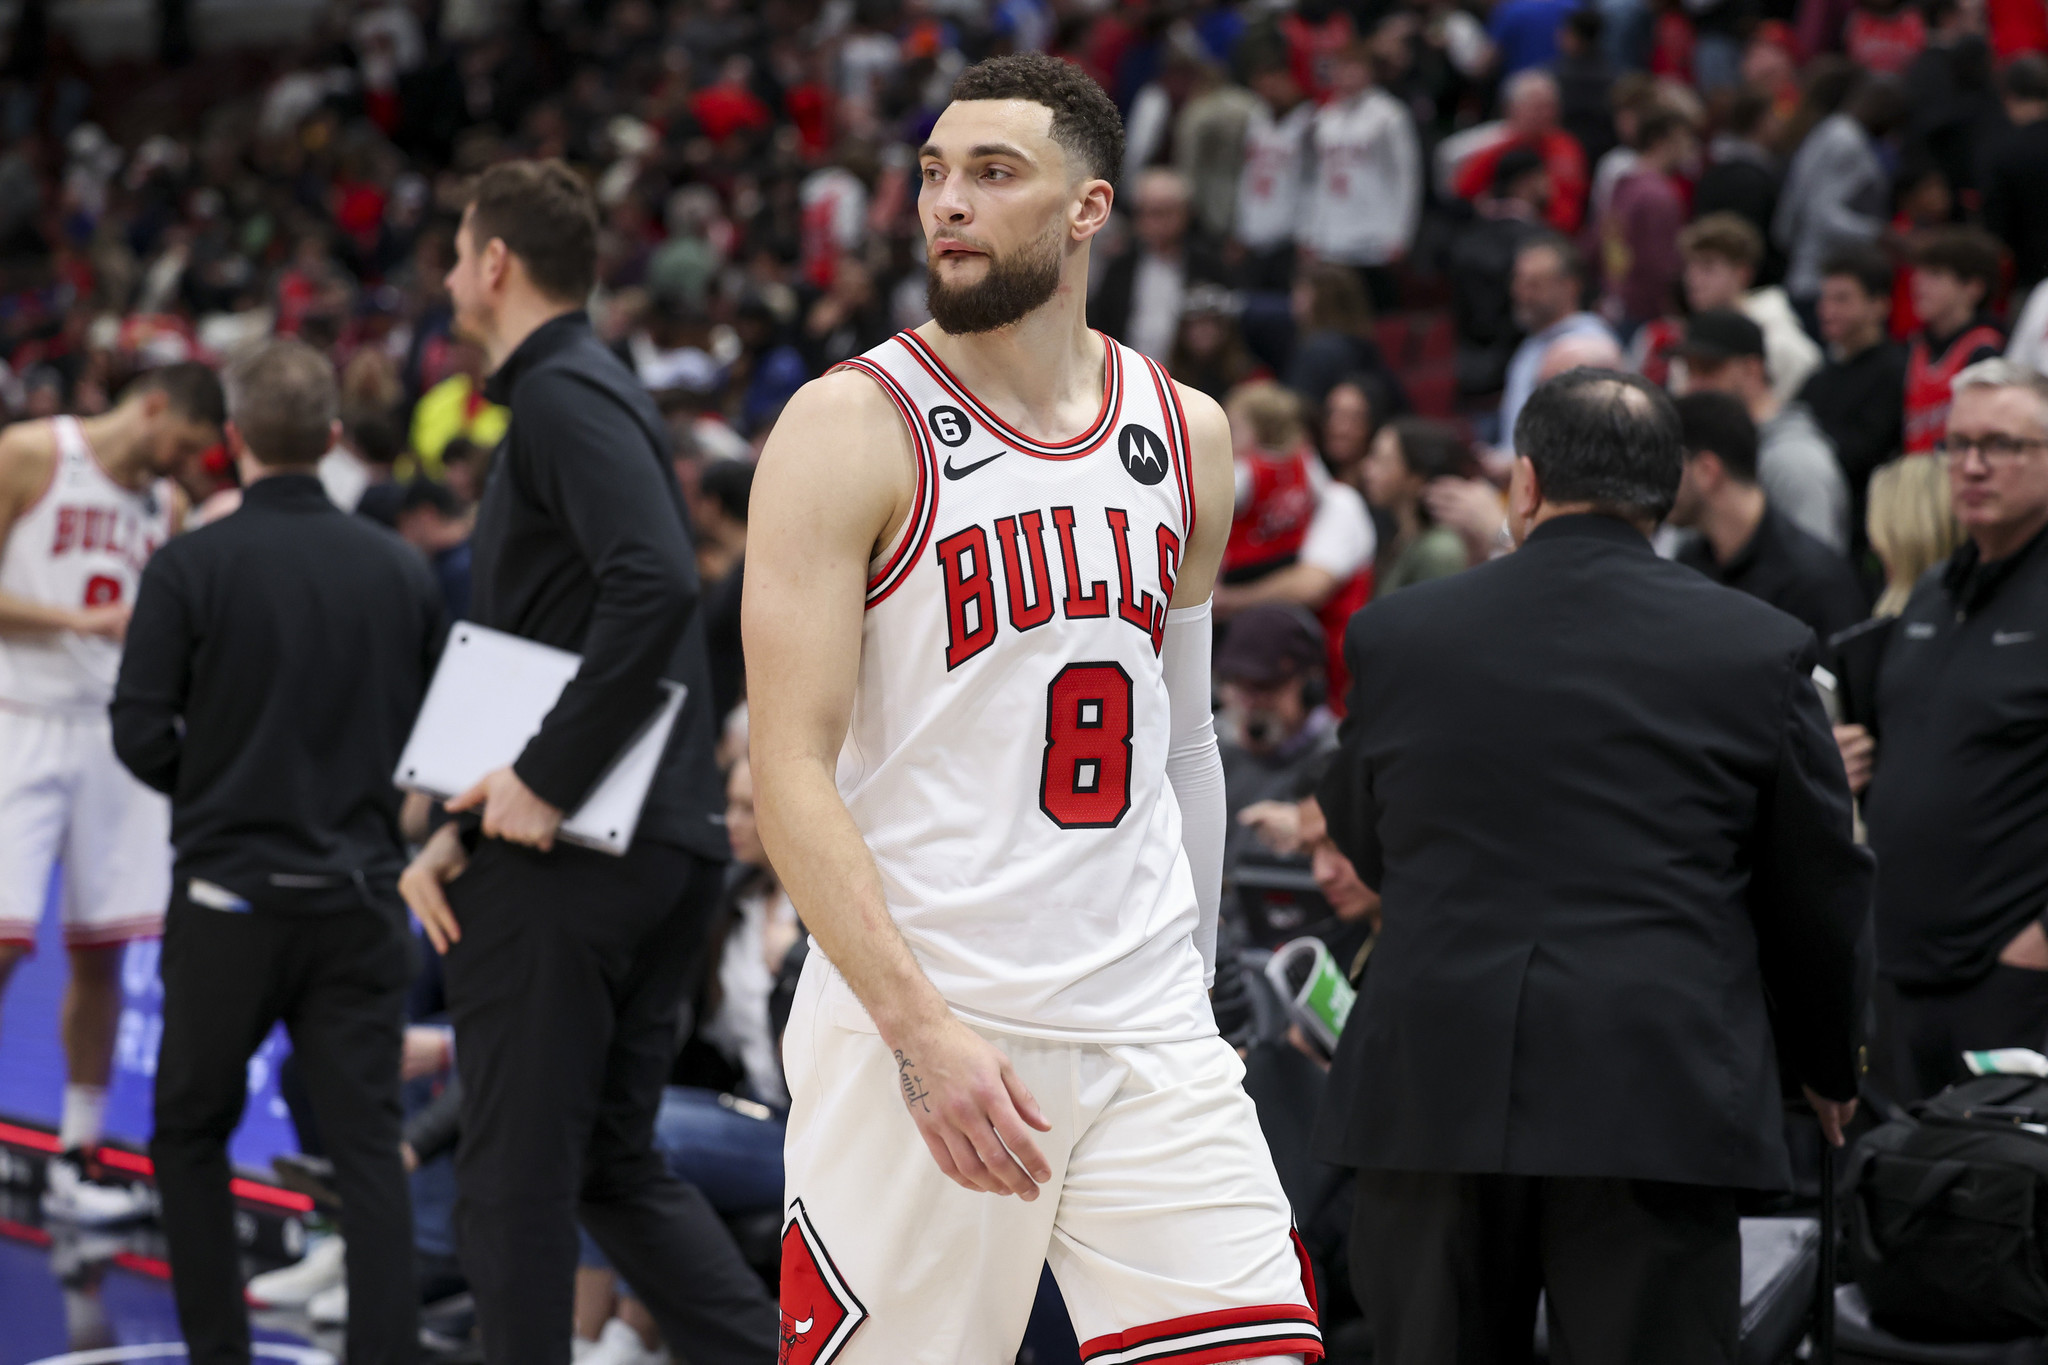 Zach LaVine scores 49 points, hits winner for Bulls after benching